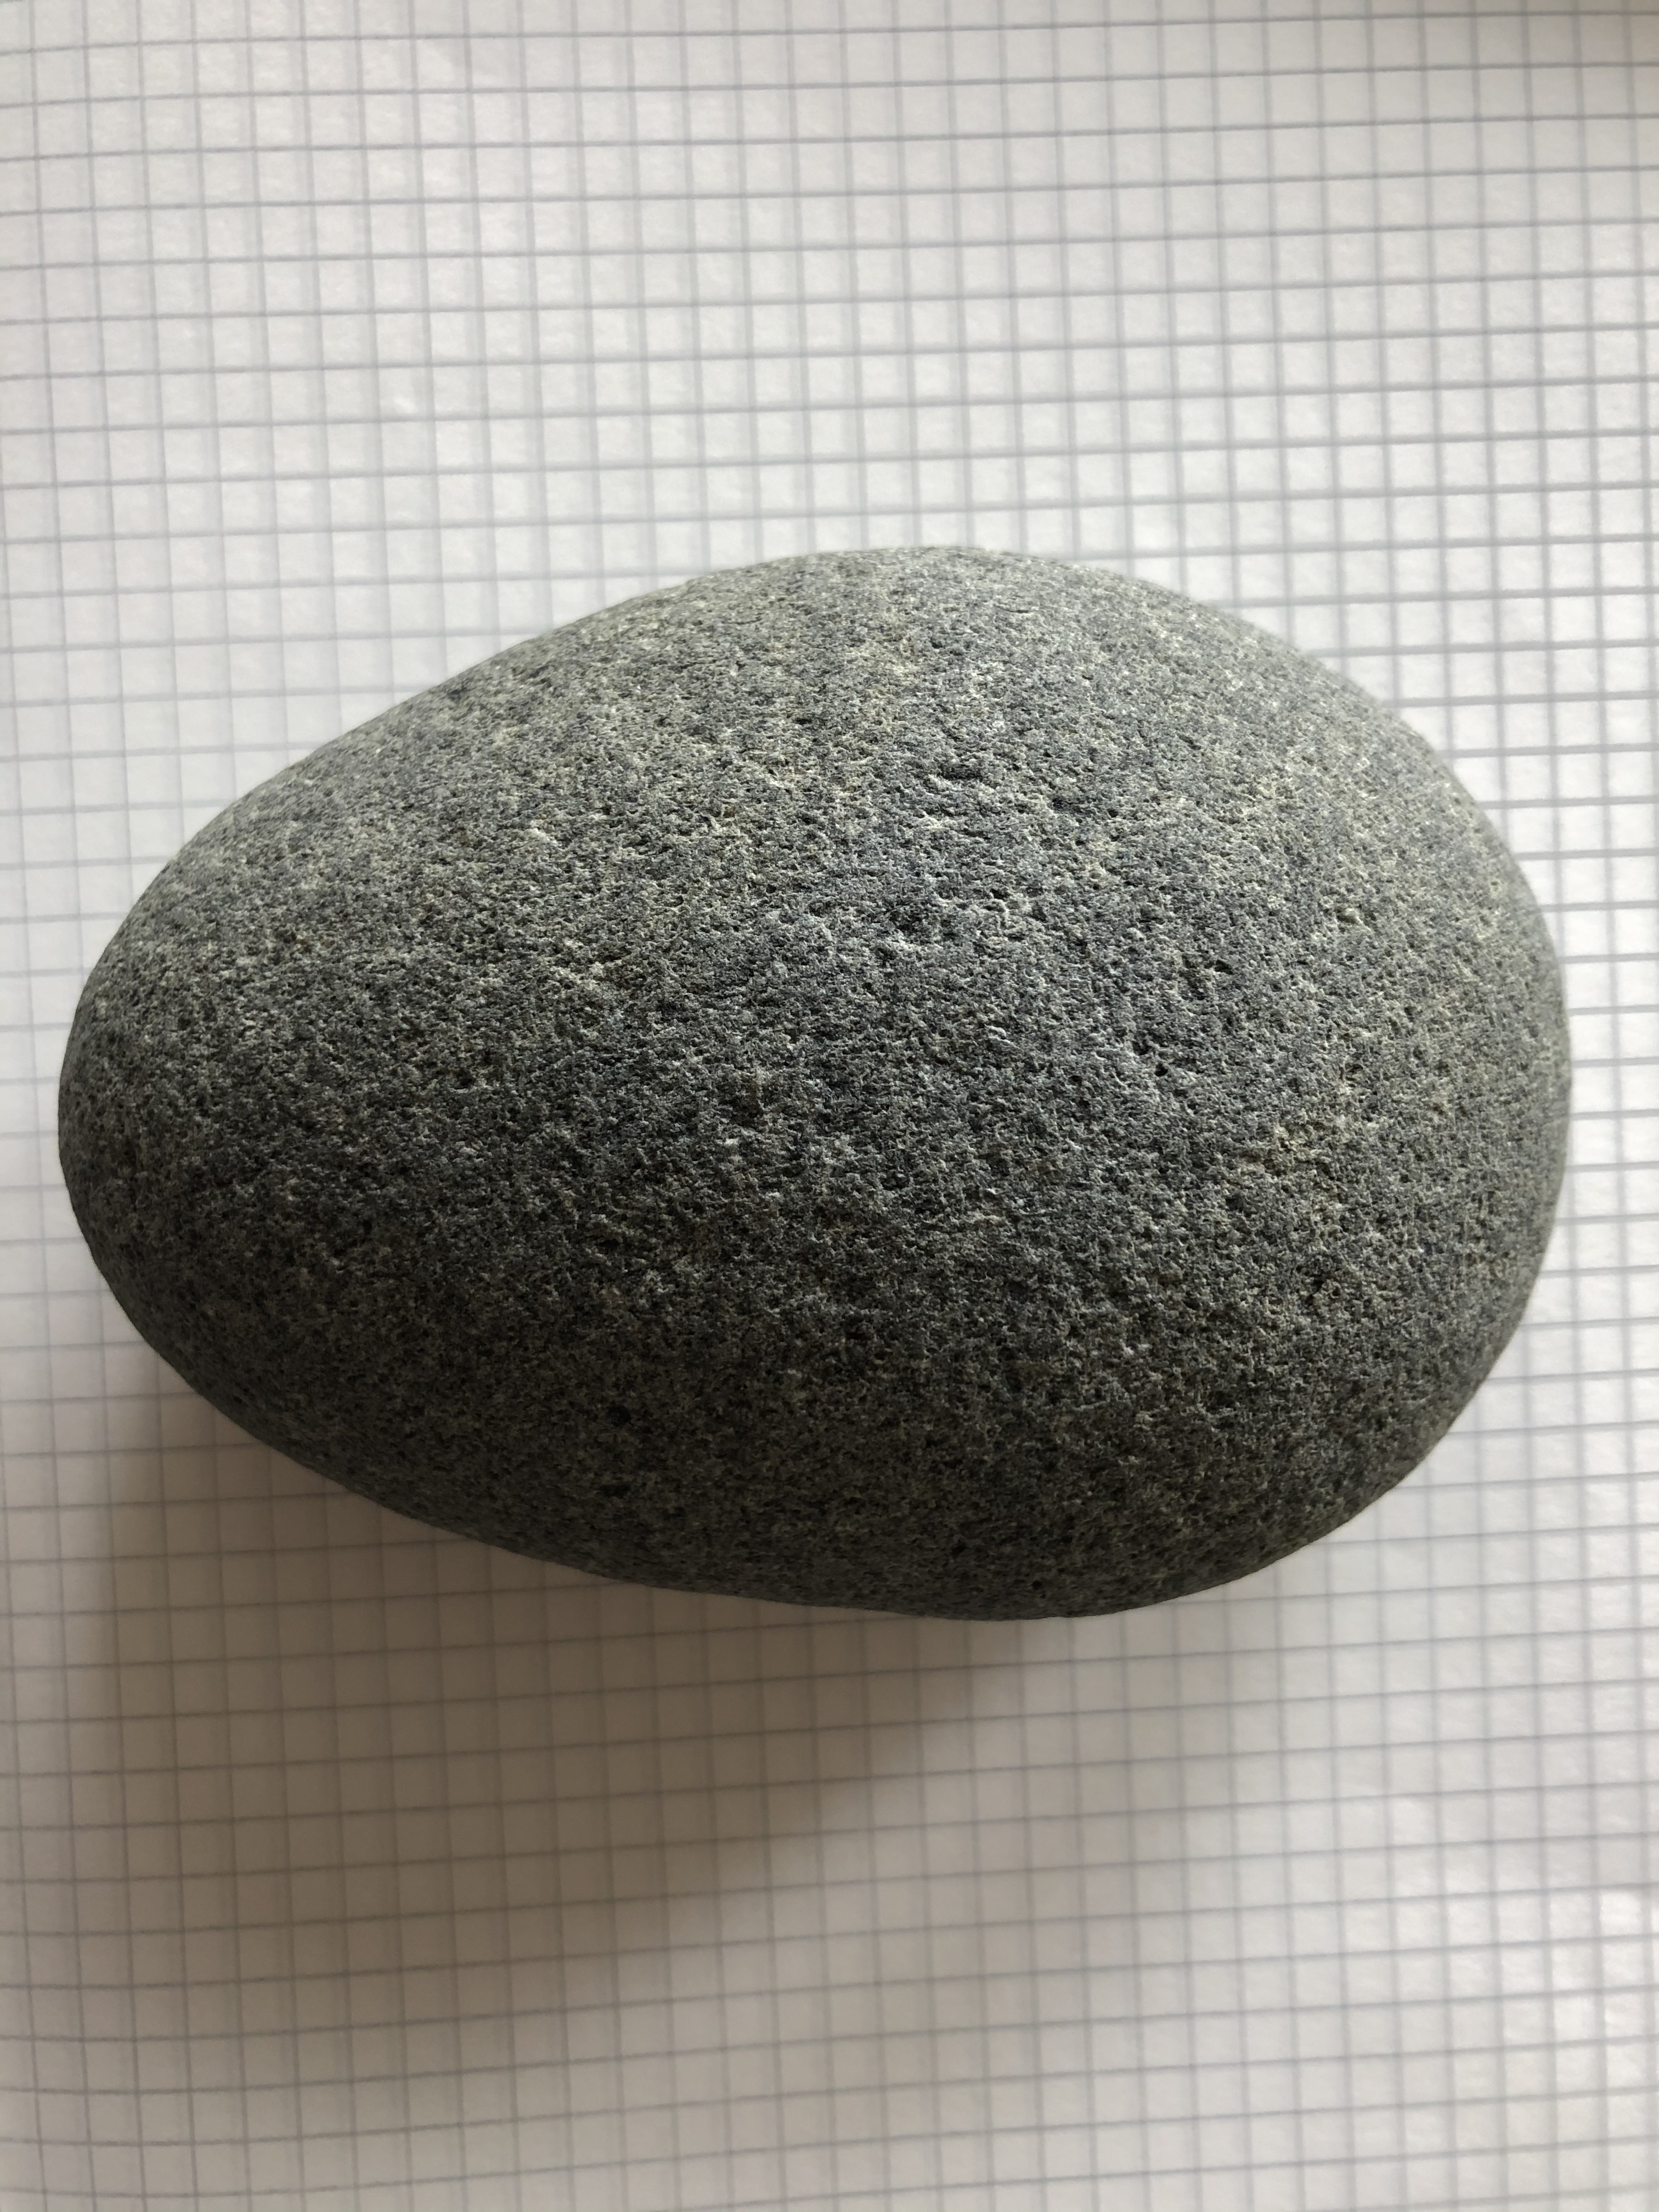 a vertical color photograph of an oval grey granite rock on graph paper